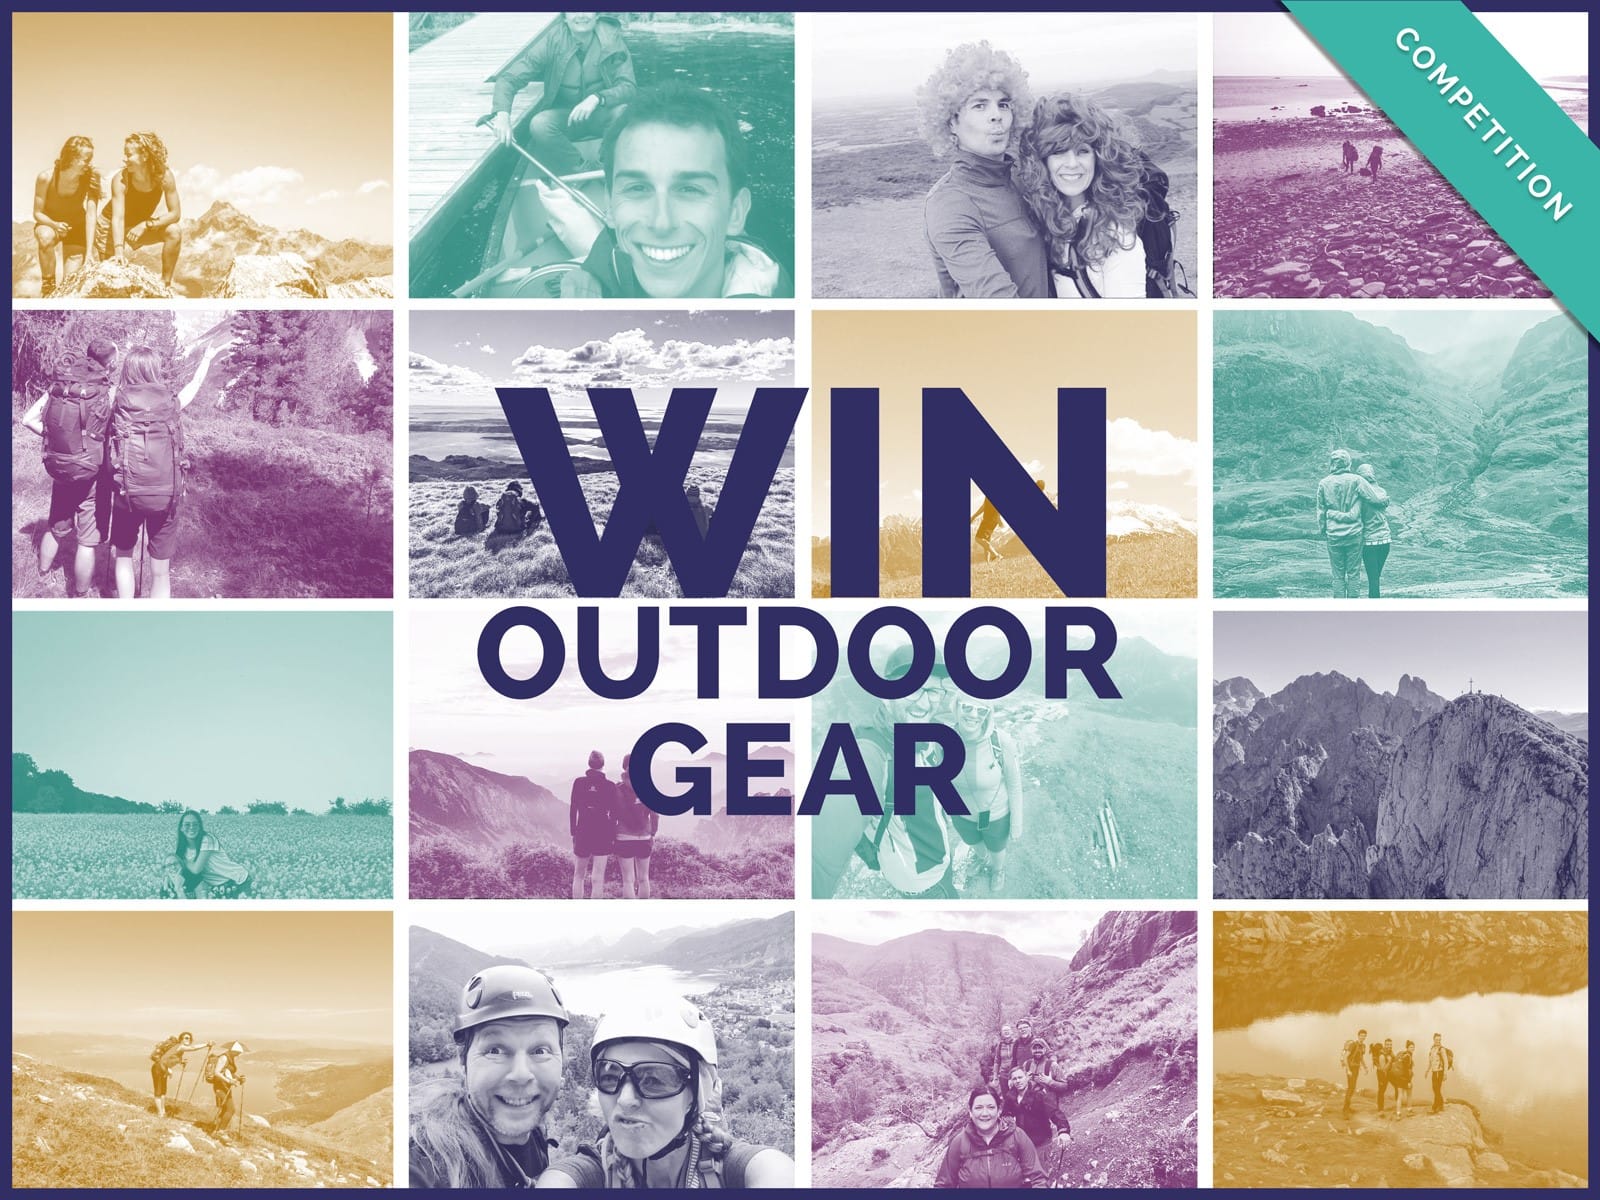 The takesomeoneoutdoors competition will run for a month